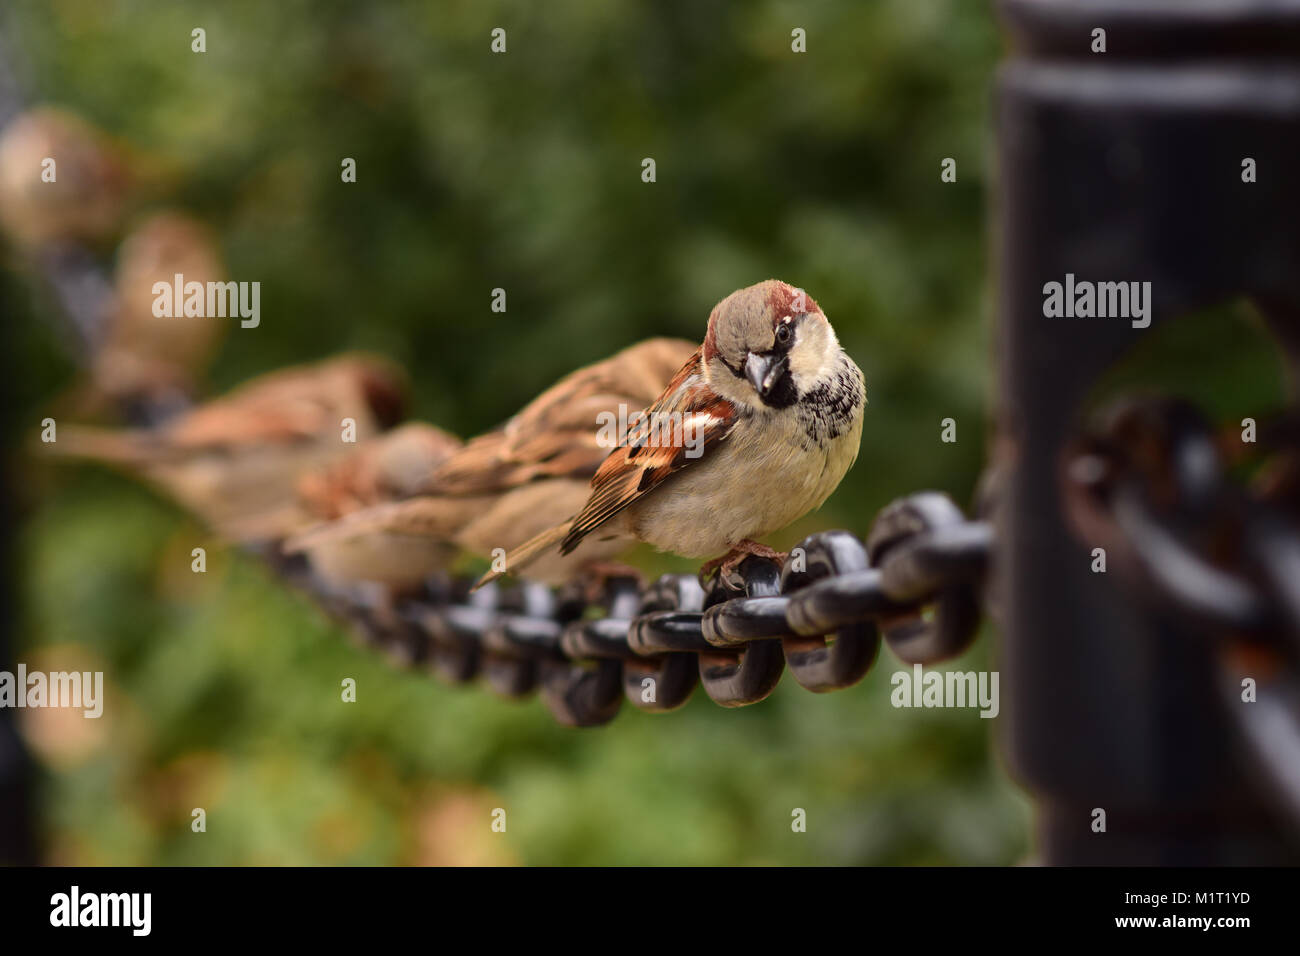 Little brown birds on a big black chain. Stock Photo